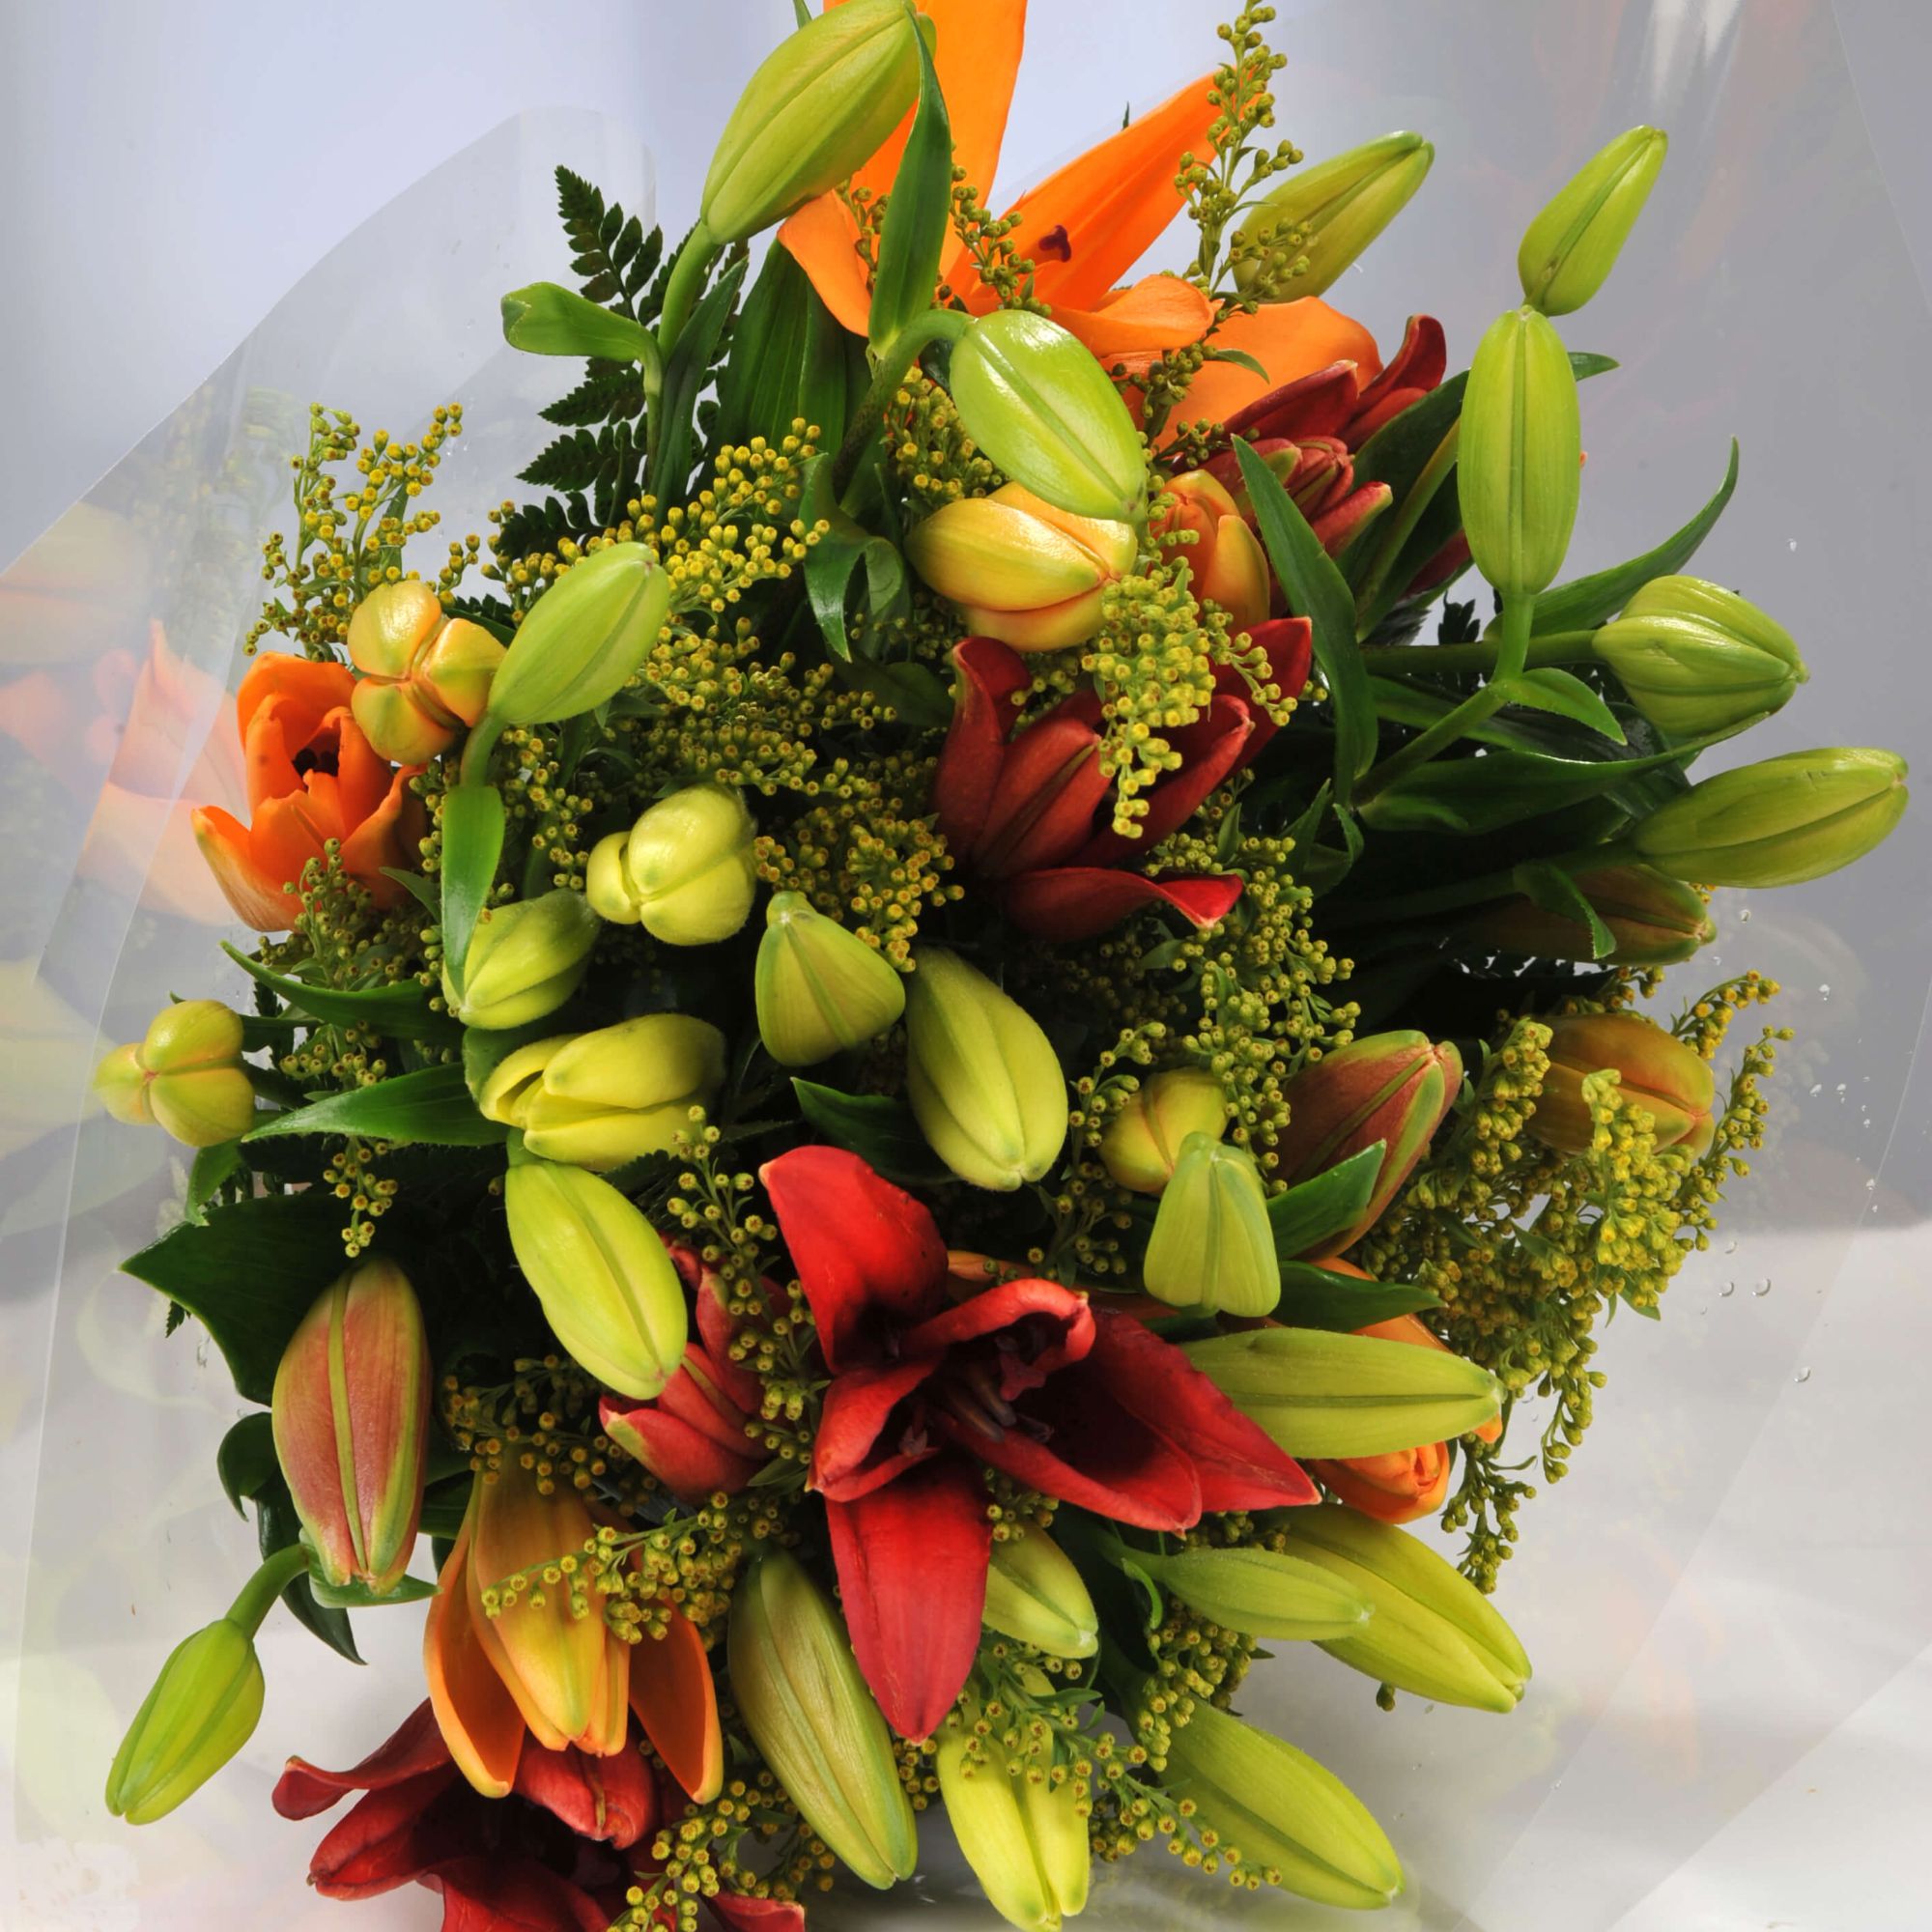 1hr Delivery TimeSlot Asiatic Lily Fresh Flower Bouquet Send Flowers UK with Free Next Day Delivery 7 Days a Week Luxury Lilies Delivered Gift Wrapped with Your Personal Card Message